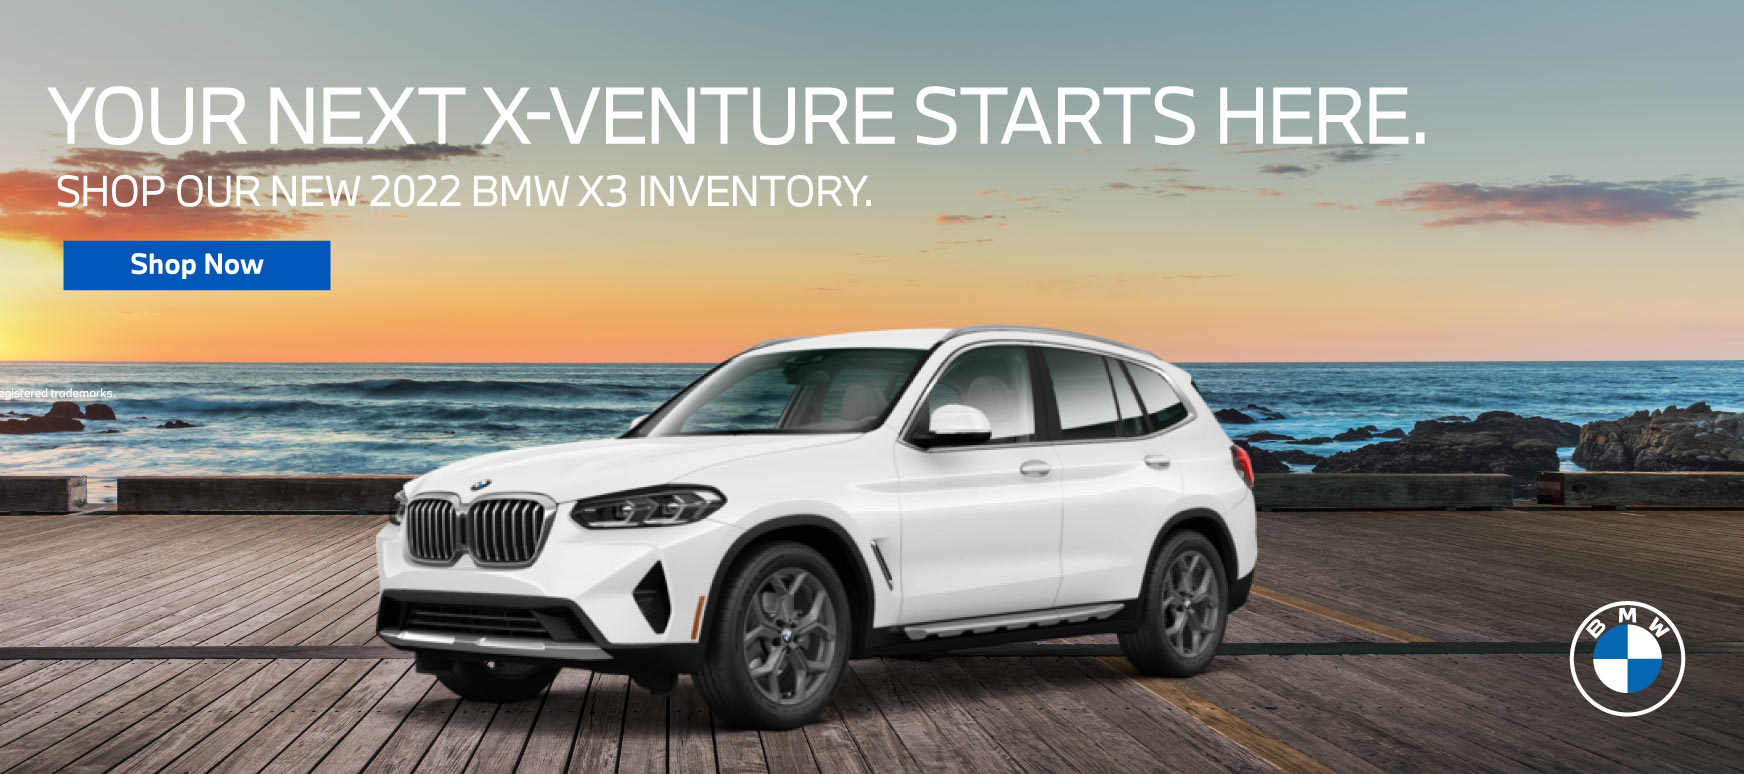 Electric Adventures Await. Test Drive the All-Electric 2022 BMW iX.